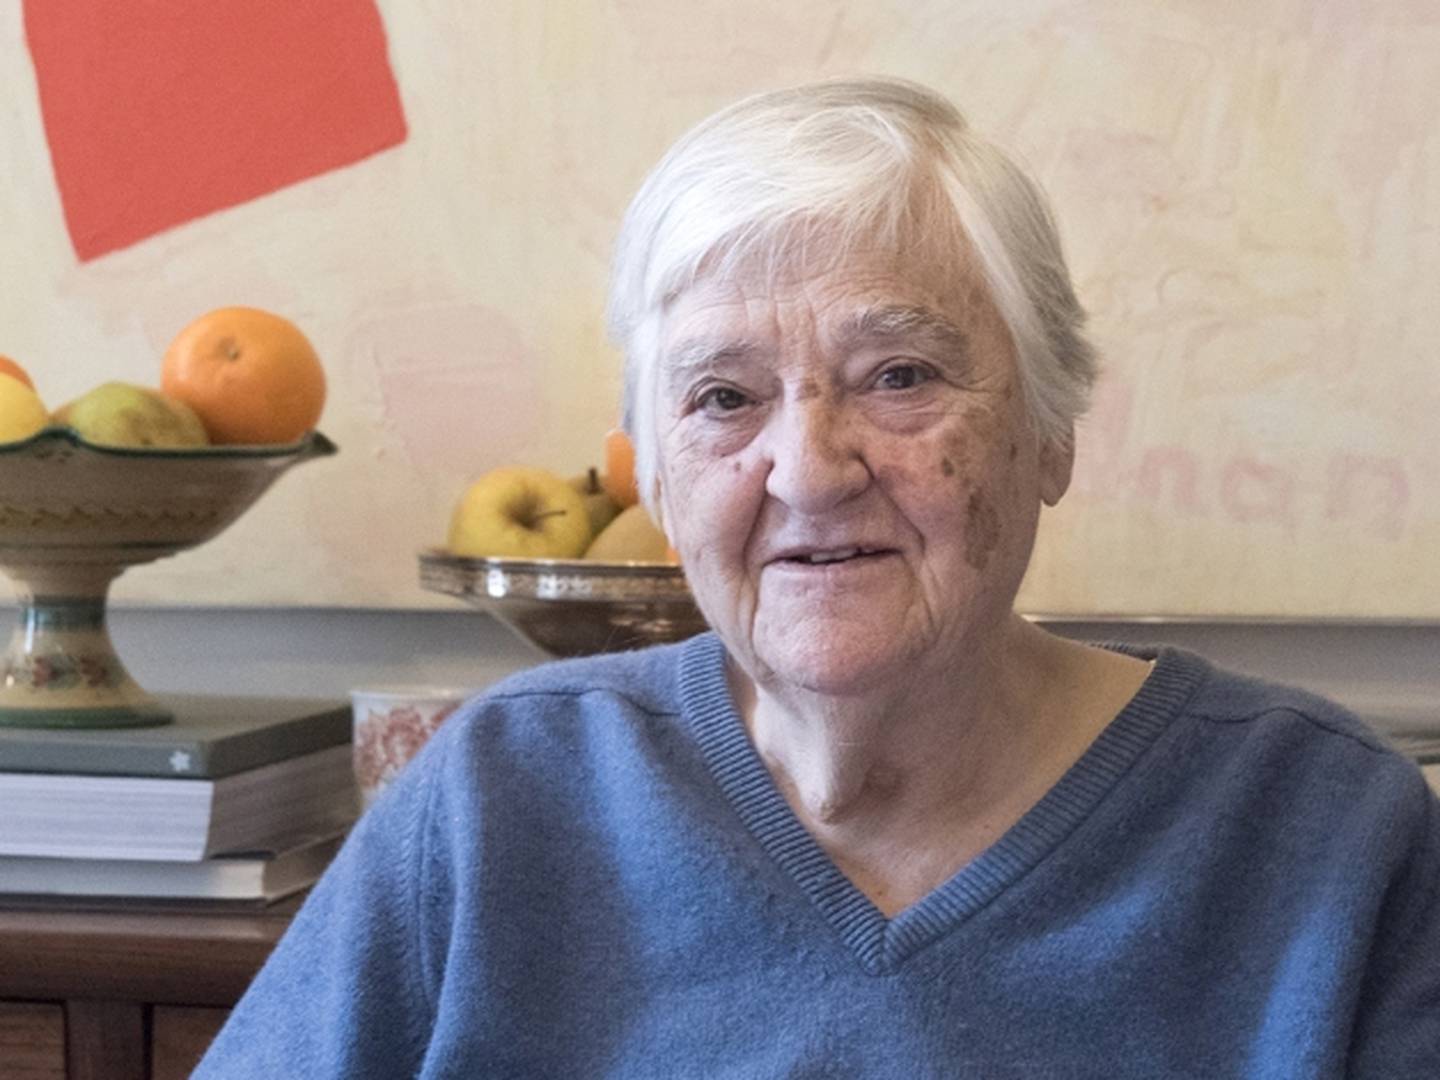 Lebanese-American writer, poet and painter, Etel Adnan, was a renowned figure in the Middle East culture scene. Photo: Abu Dhabi Festival